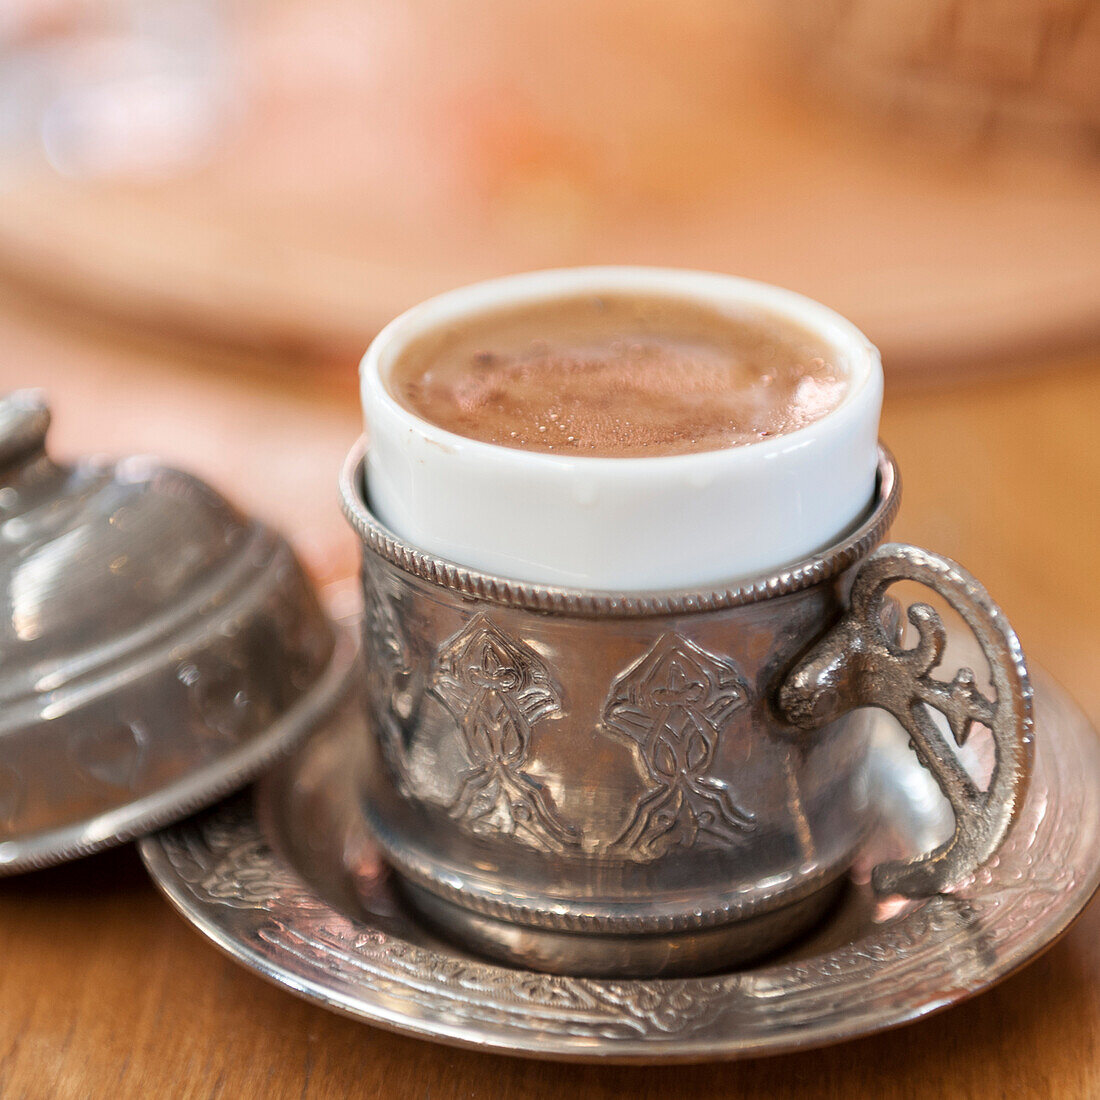 'Hot beverage with foam served in a silver cup and saucer set;Istanbul turkey'